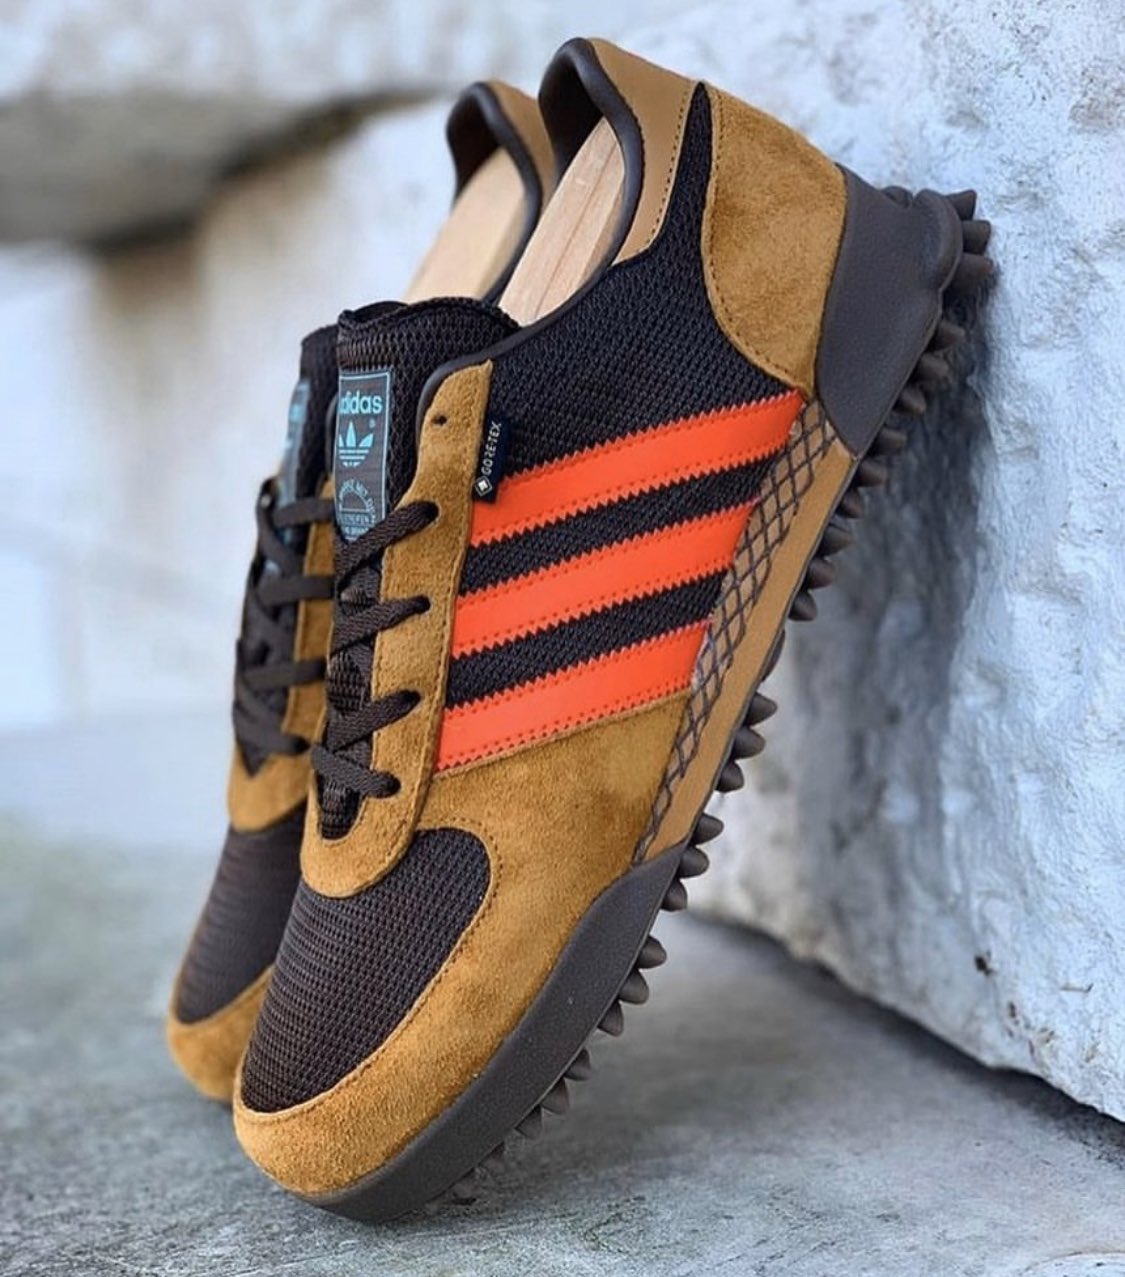 ajedrez tensión pastel Man Savings on Twitter: "Coming soon .... 🔥🔥 The Size exclusive adidas  Marathon TR GTX 'Goretex' on sale tomorrow. Keep eye on the page for  release details. https://t.co/ujvqeHpzWQ" / Twitter